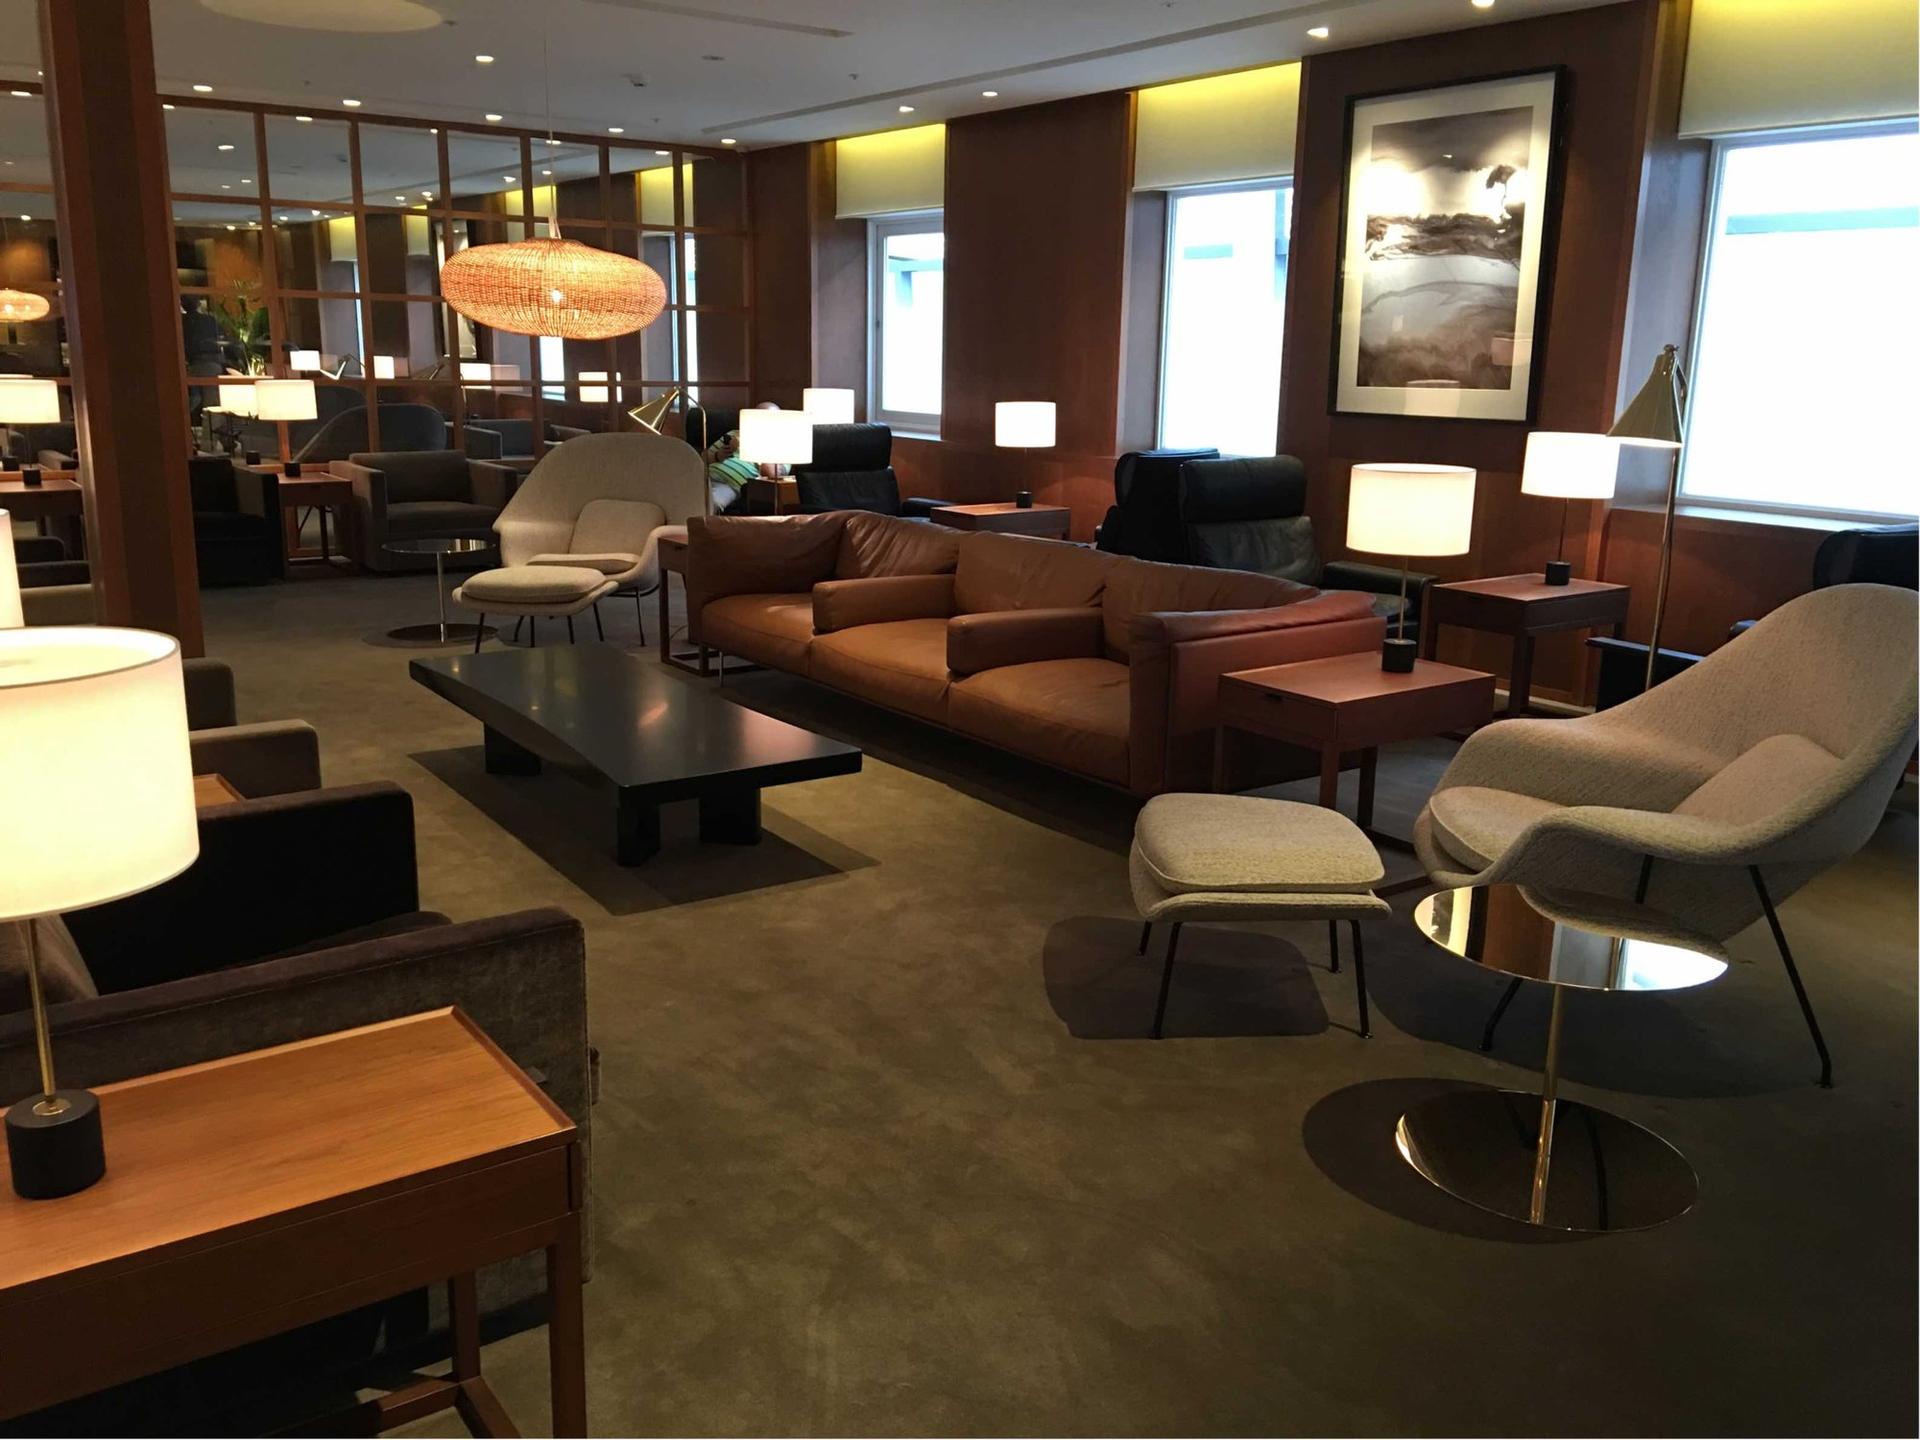 Cathay Pacific Lounge image 6 of 37